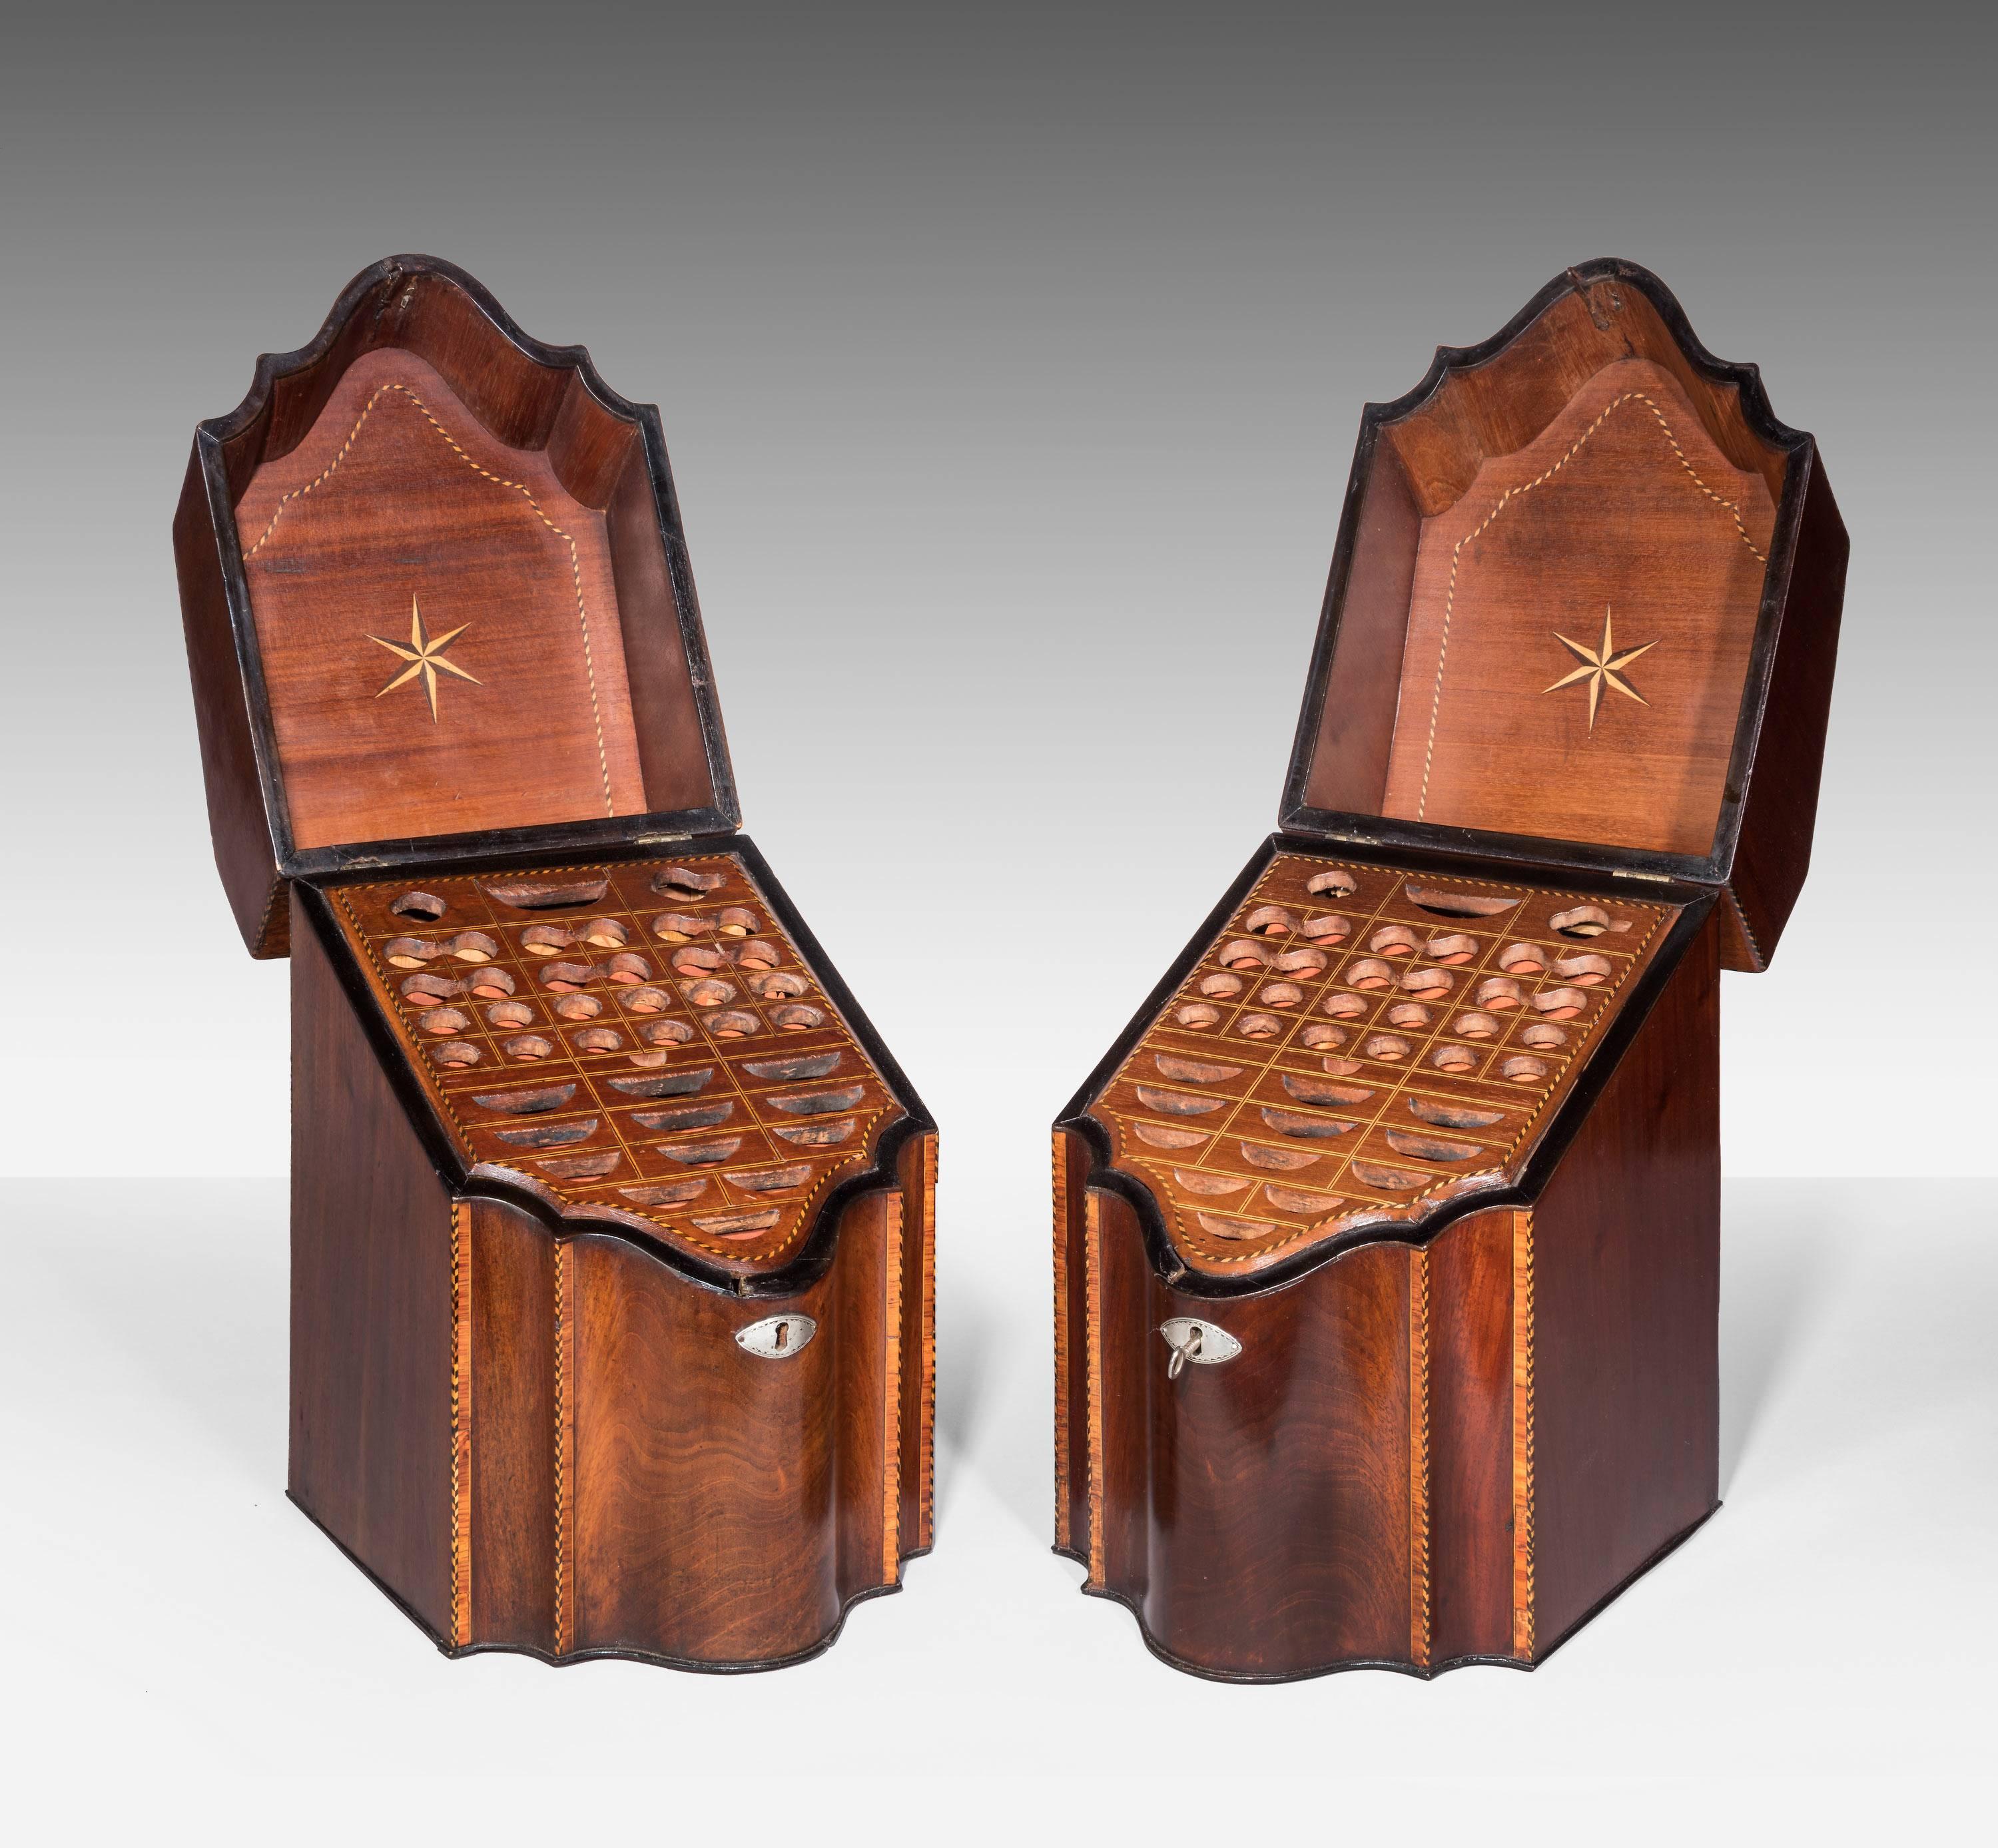 A Fine Pair of Double Serpentine Mahogany Knife boxes. Retaining their original fitted interiors.  The whole with a chequered edge inlay and within that frame work fine cross banded Indian wood. Excellent overall condition. Retaining original oval